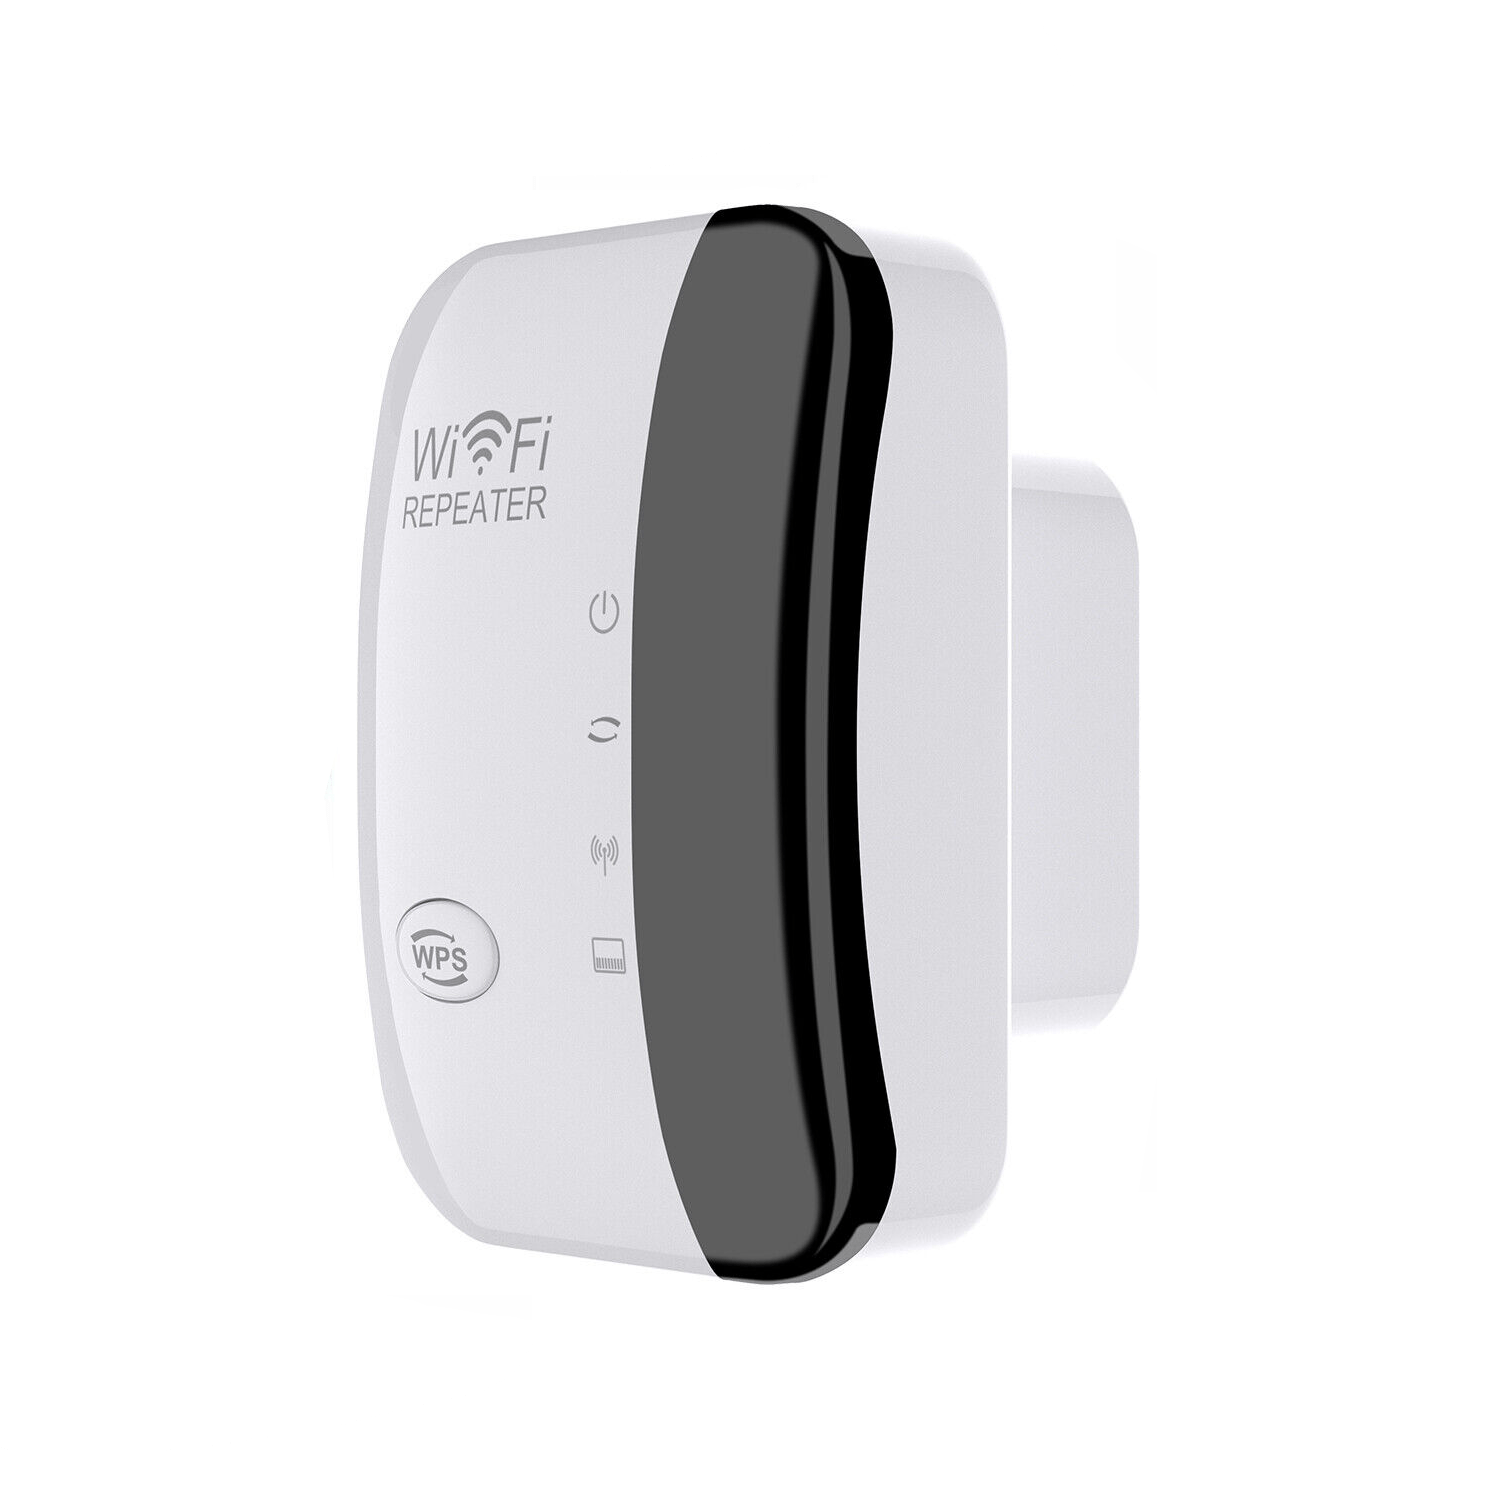 What Is A WiFi Repeater?